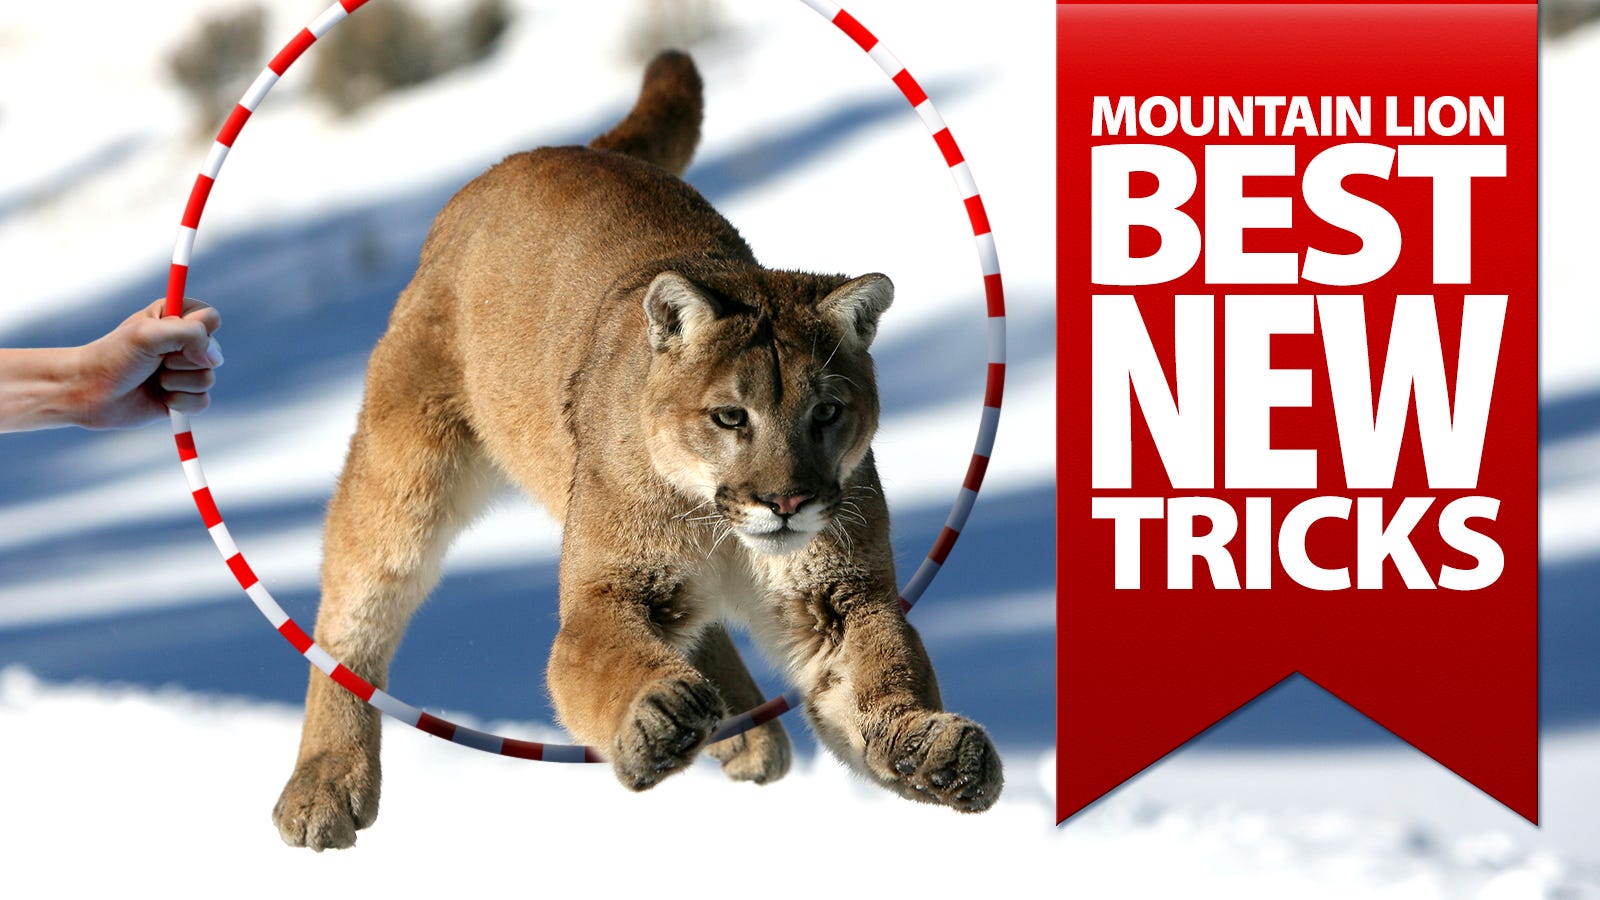 OS X Mountain Lion's Best 10 Tricks: The How-To Video Guide